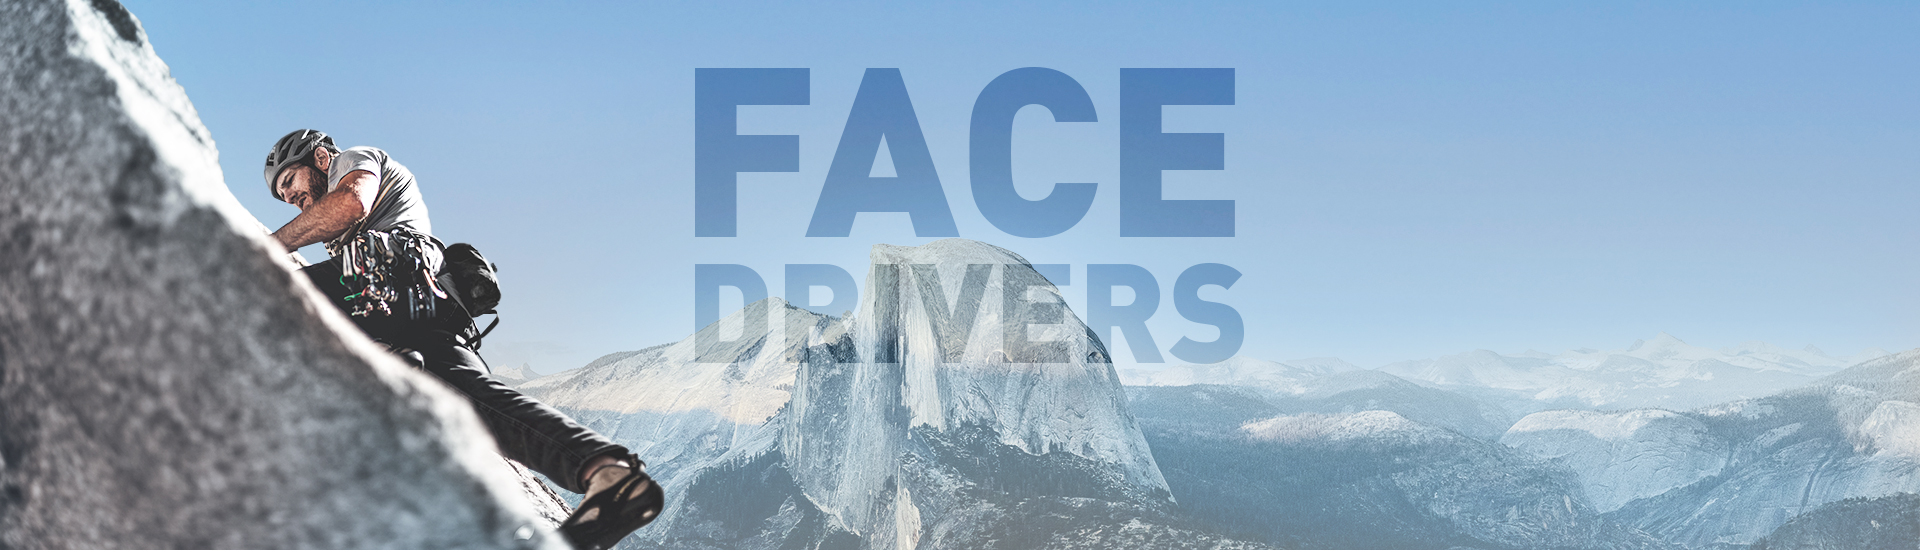 Face Drivers